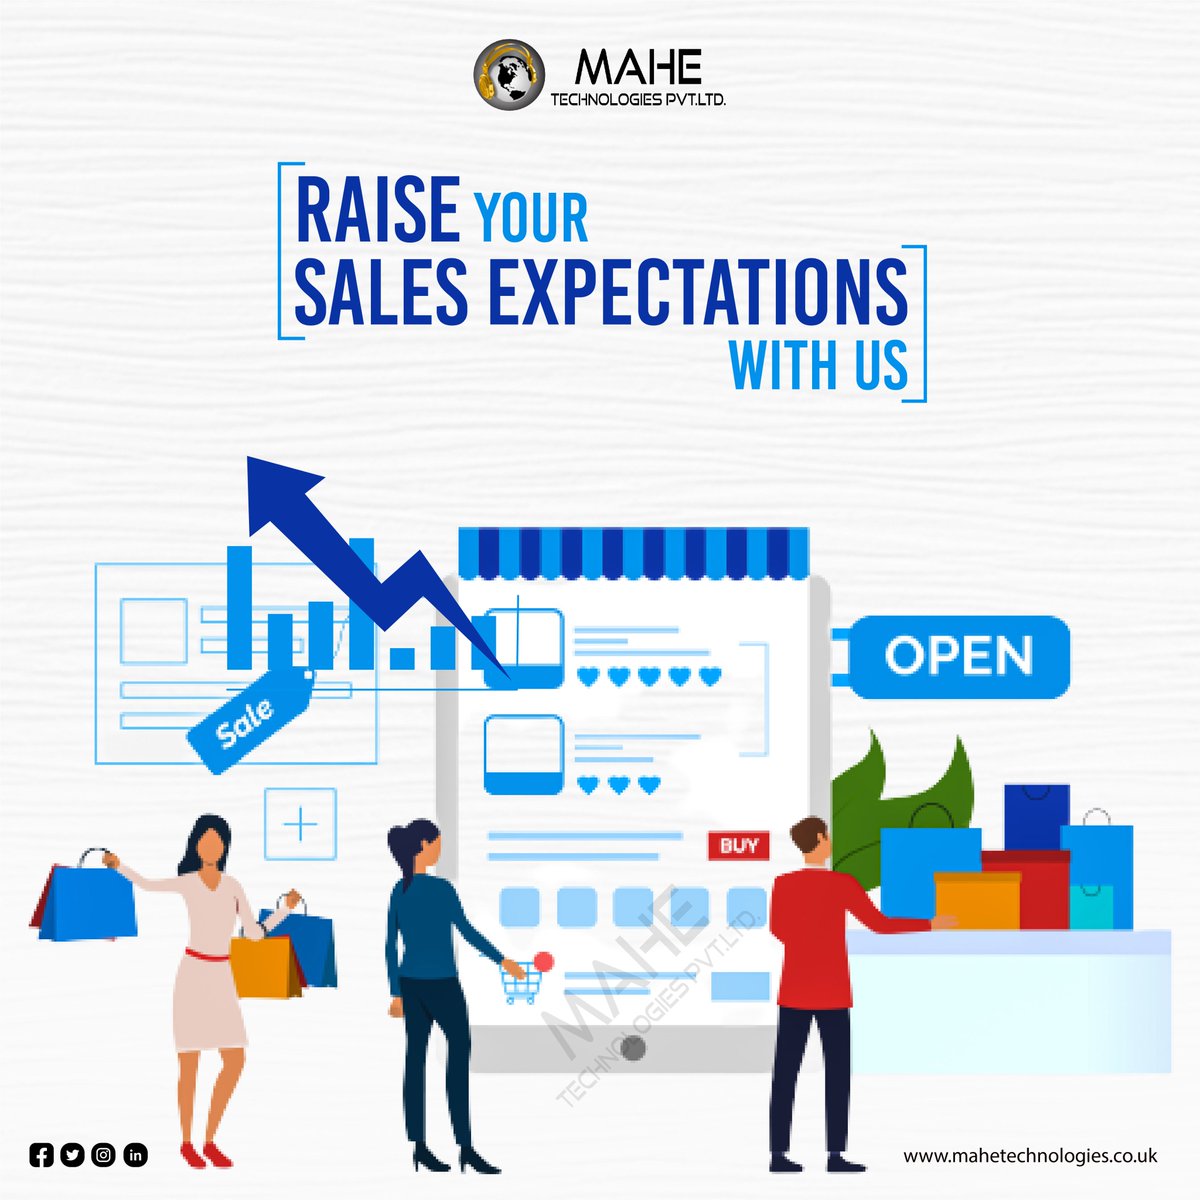 With our problem solving methods we anticipate,understand and help to meet the needs of the customers.
 .   
Visit Us - mahetechnologies.co.uk
.
#productsales #productsale #productsampling #productsketch #productstyling #productshots #productshoot #productsandservices